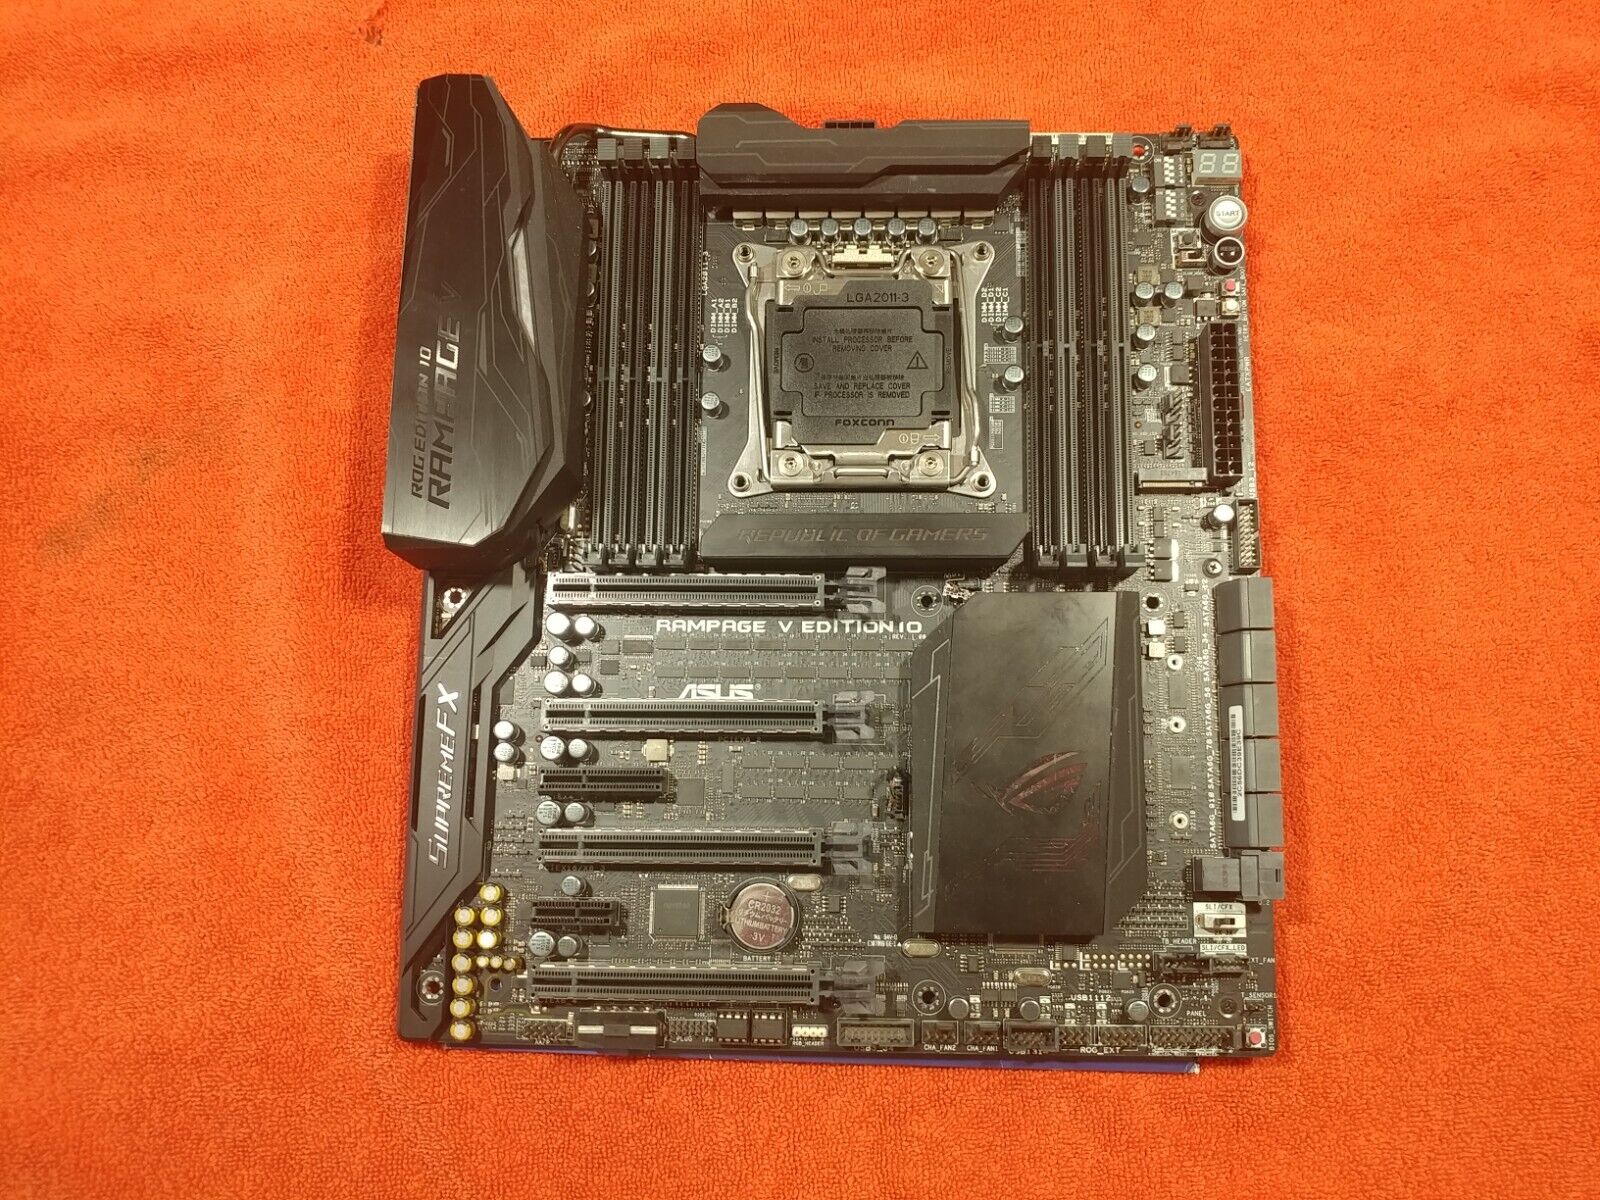 ASUS X99 ROG RAMPAGE V EDITION 10 (PARTS ONLY)